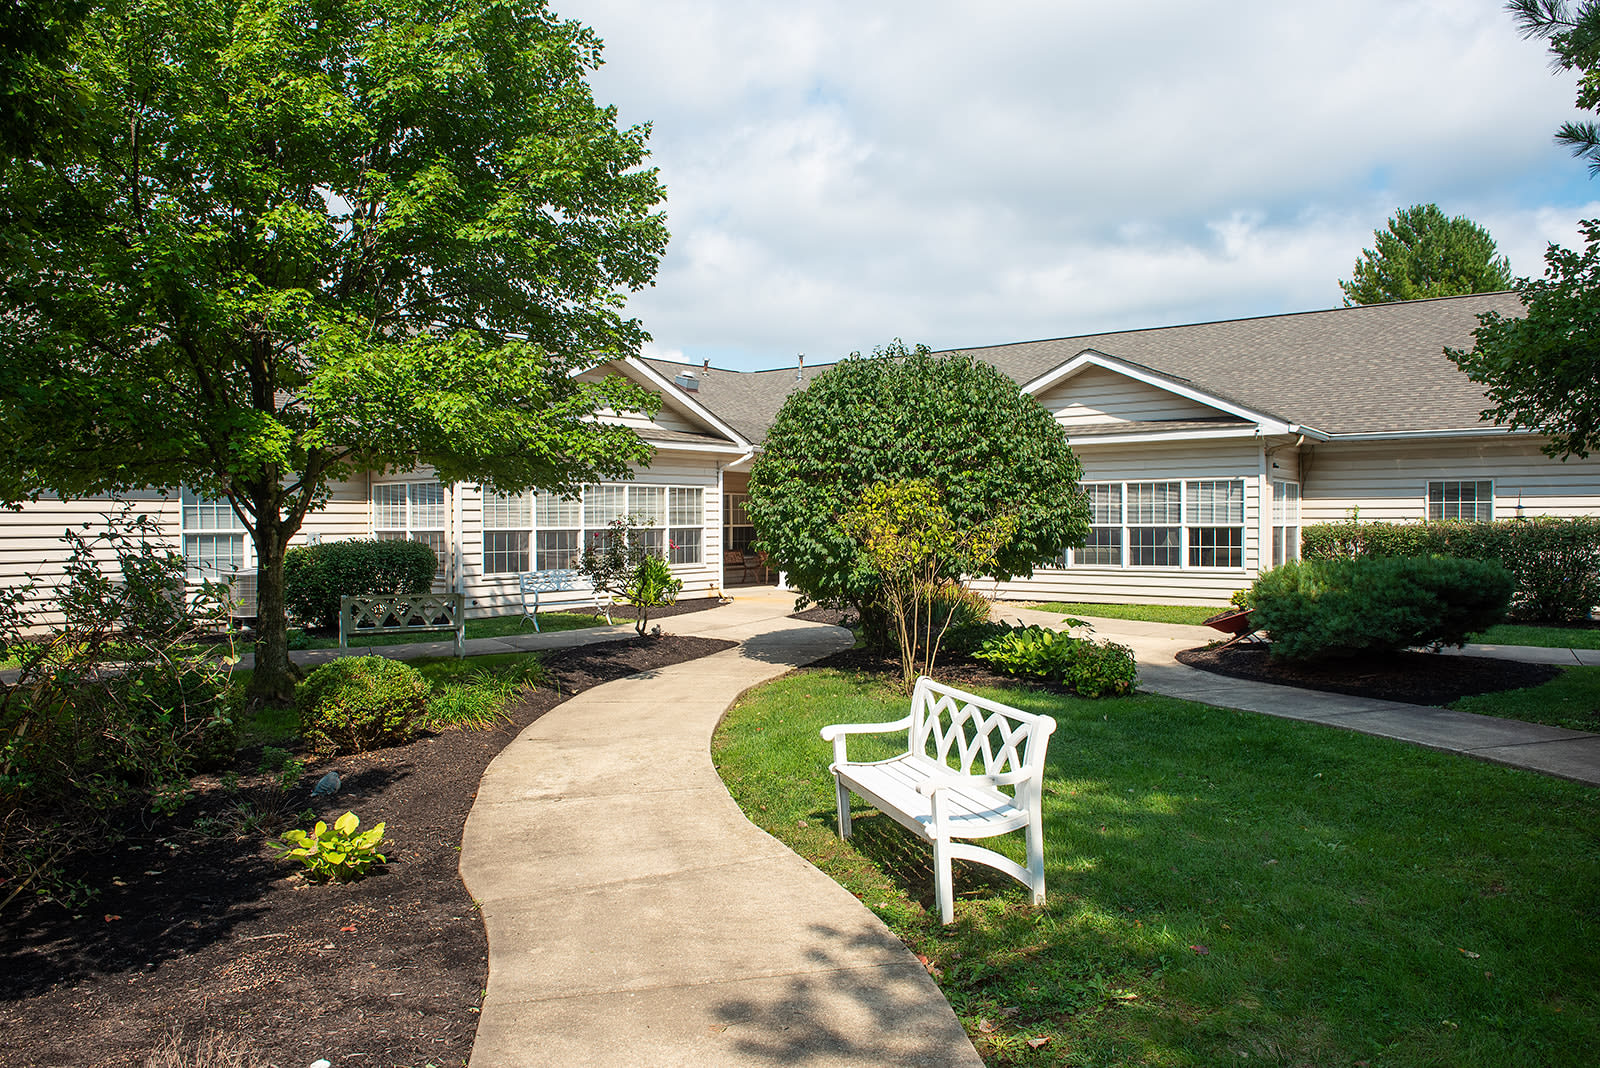 Commonwealth Senior Living at Hagerstown 